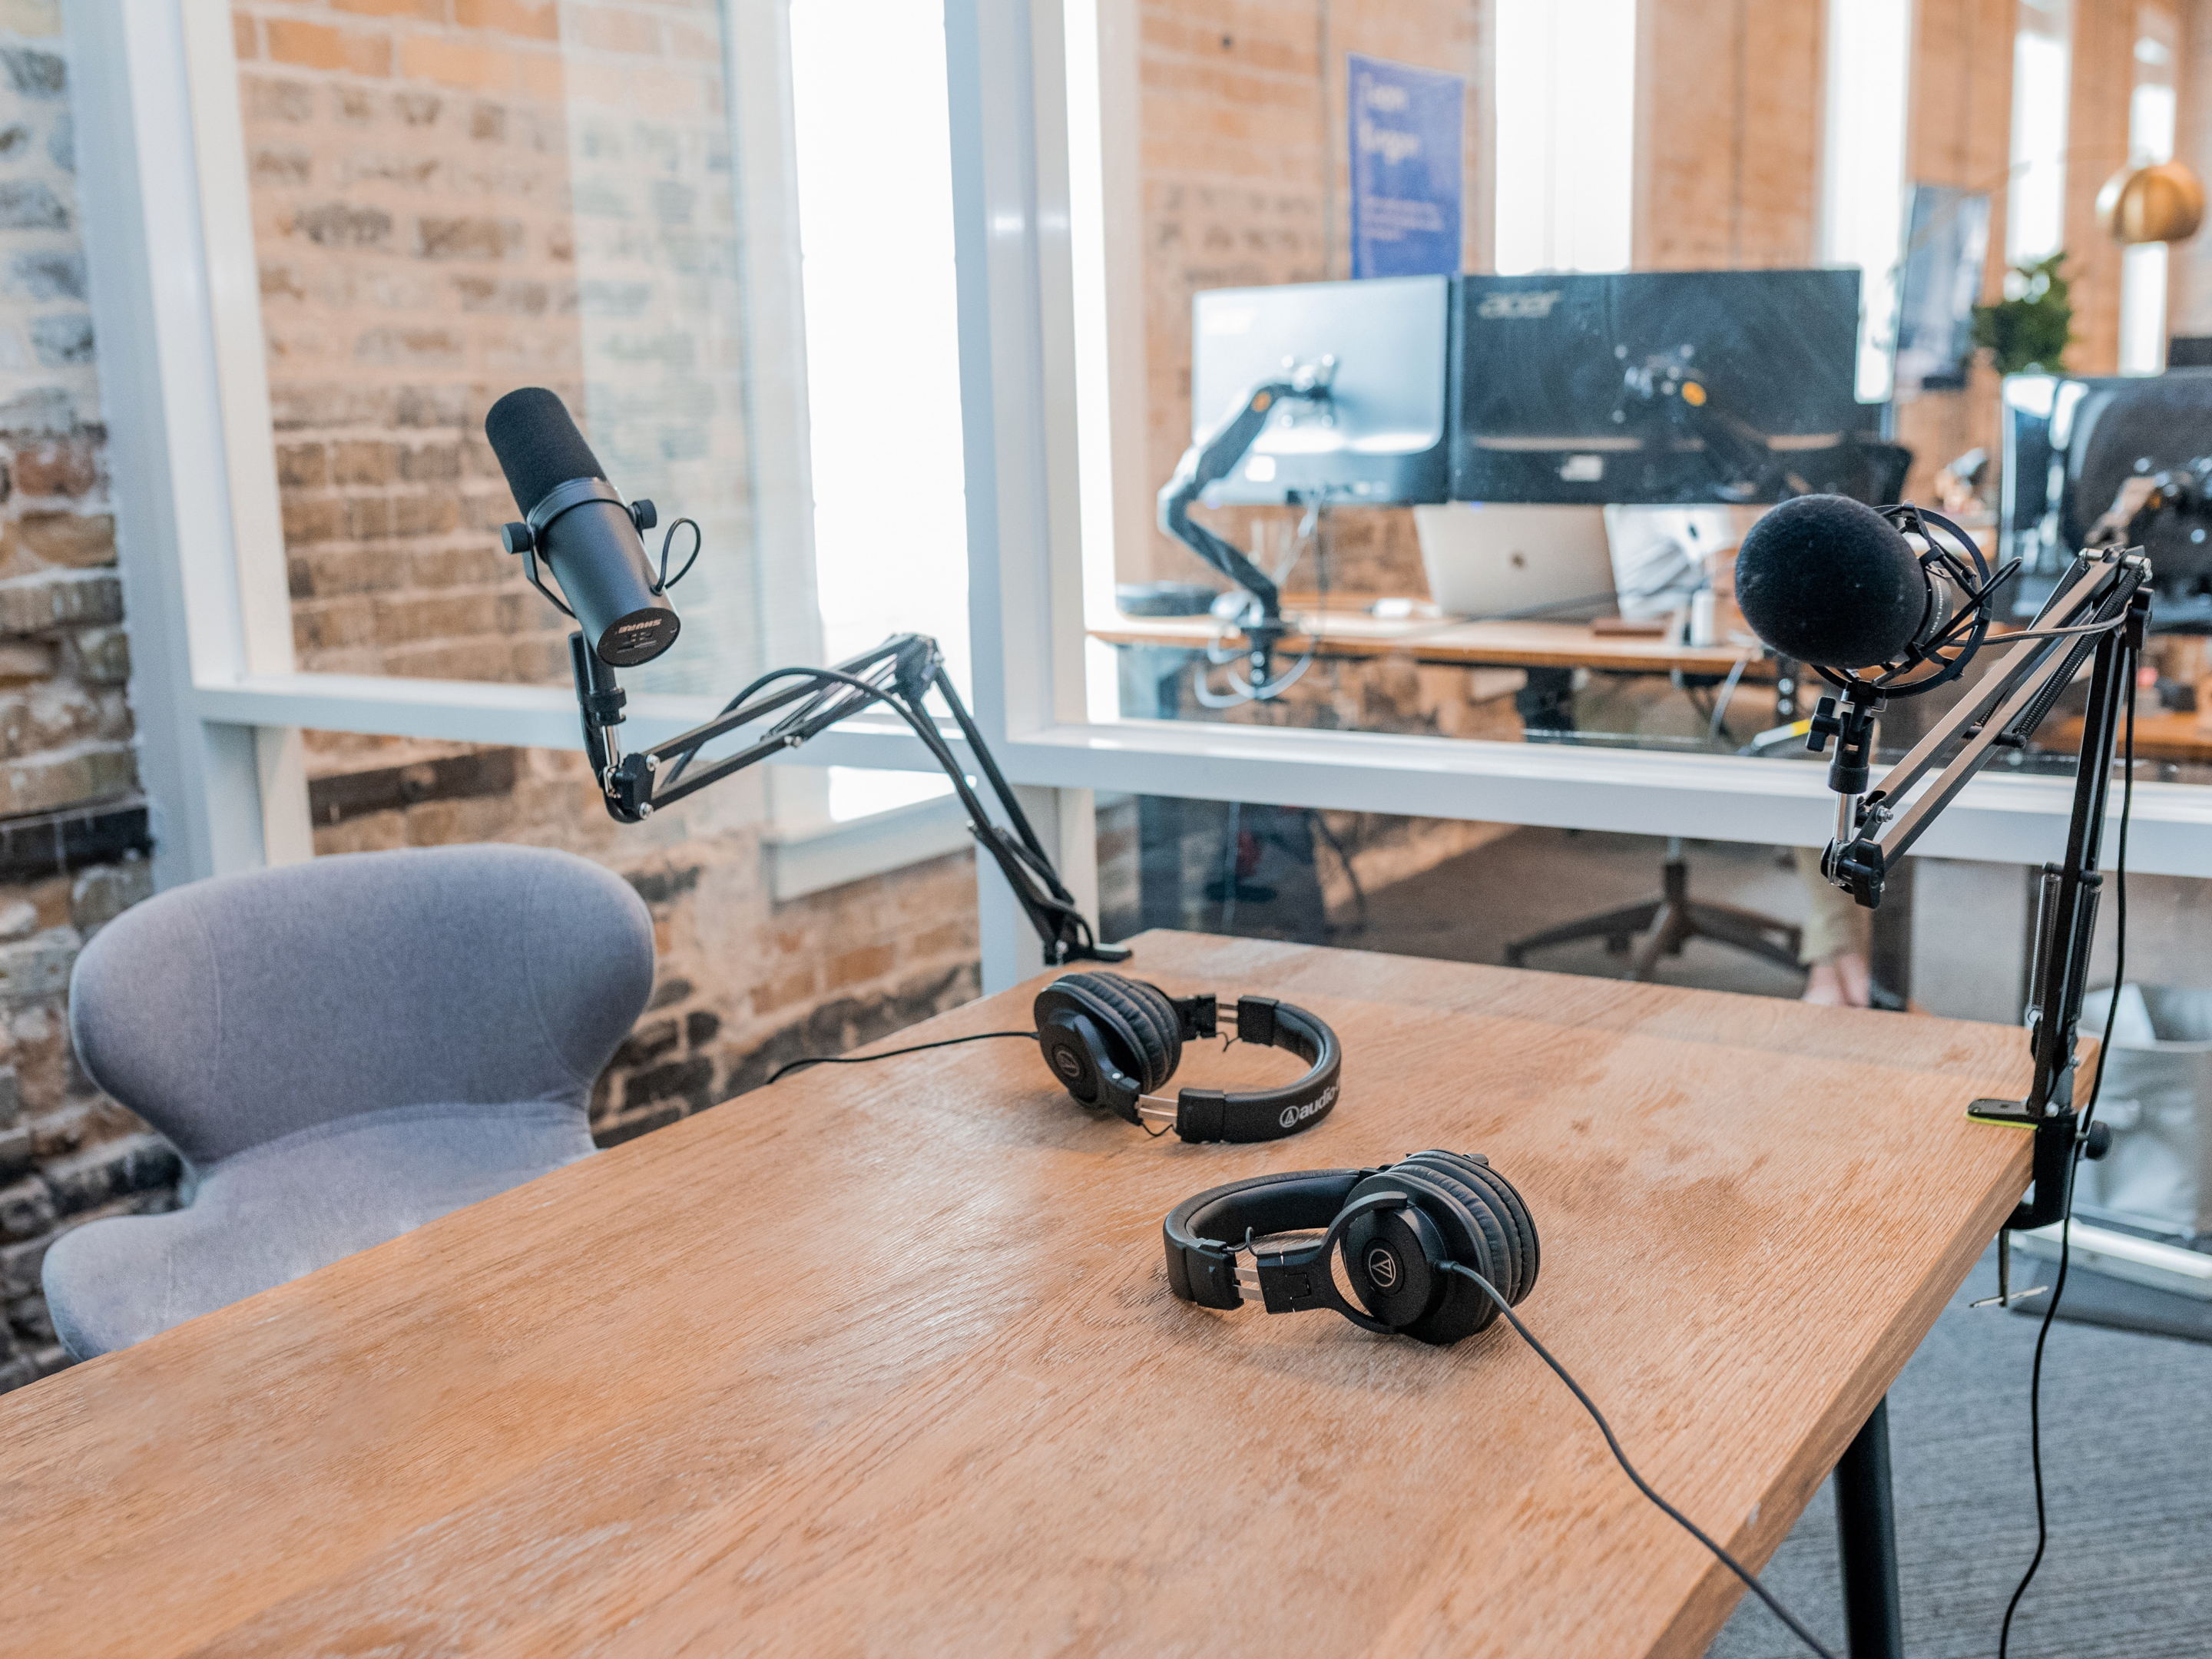 Are Marketing Podcasts Worth It?